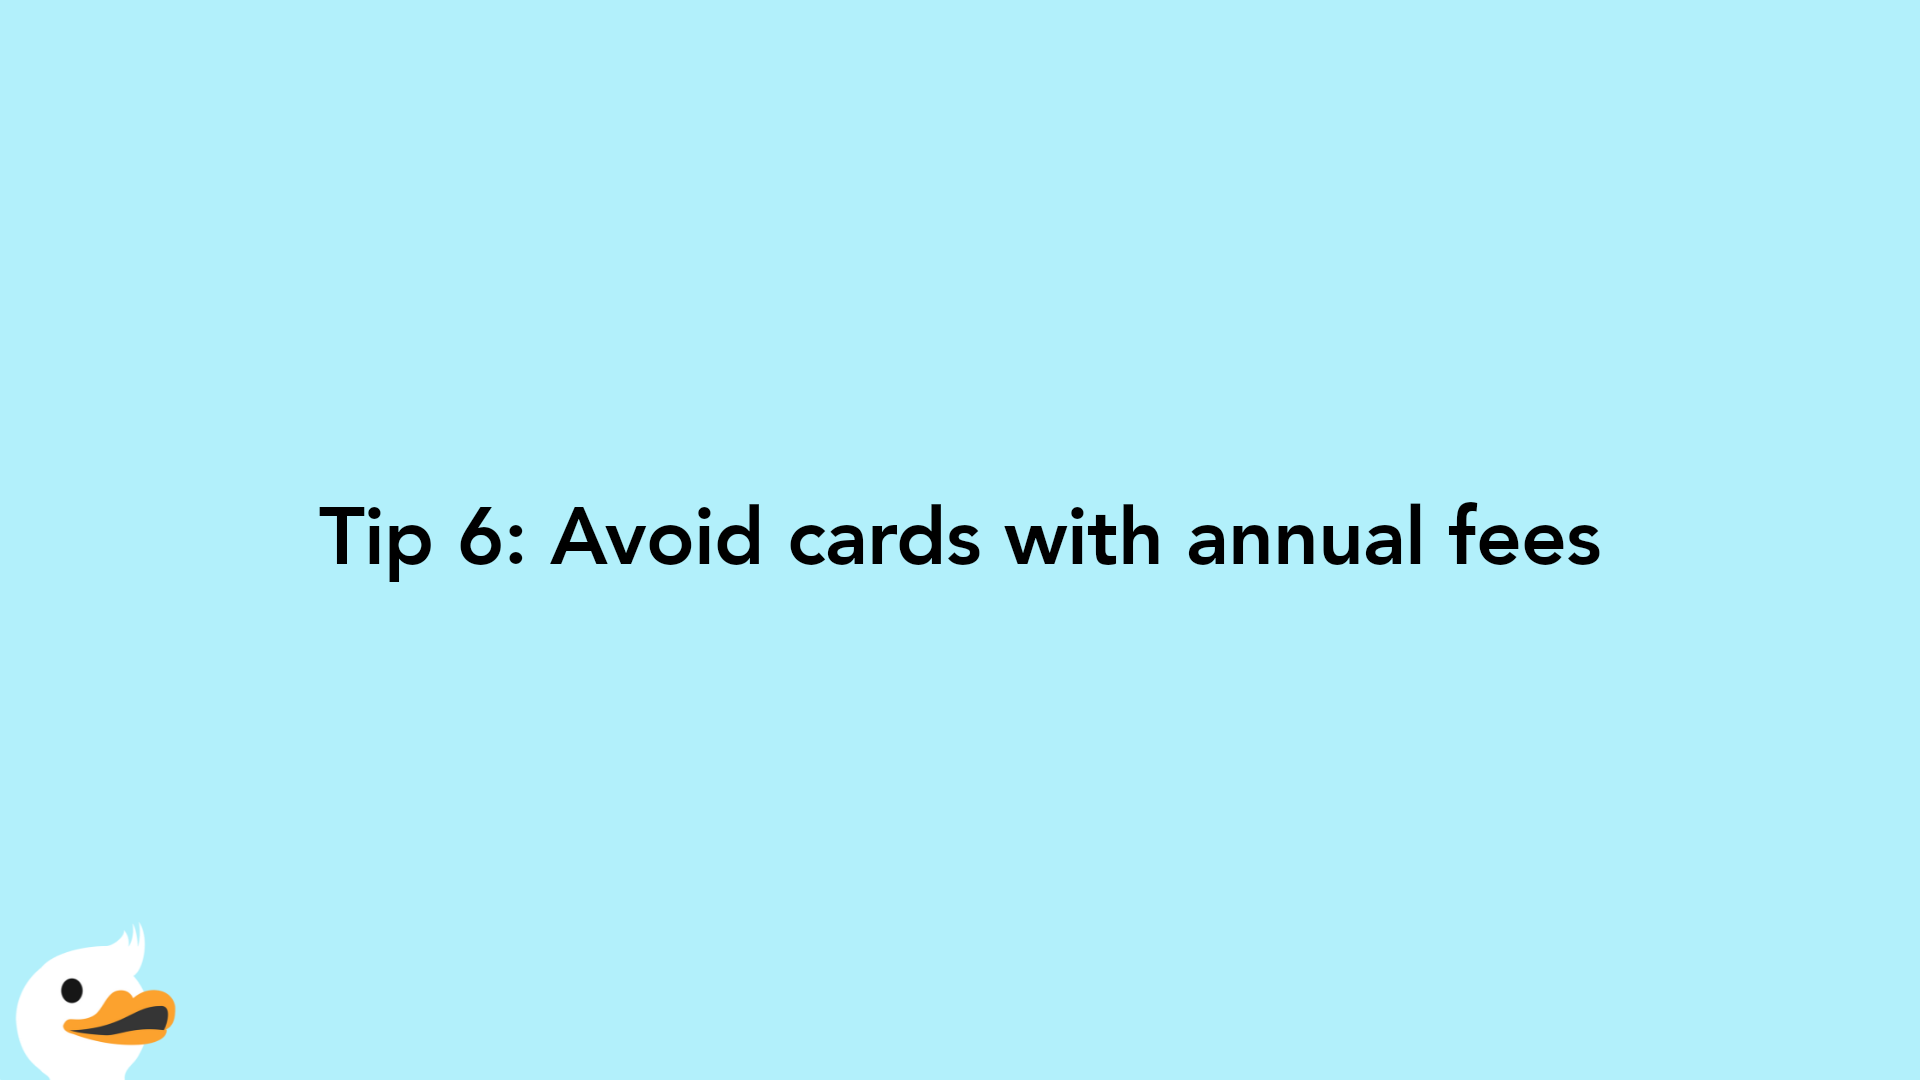 Tip 6: Avoid cards with annual fees